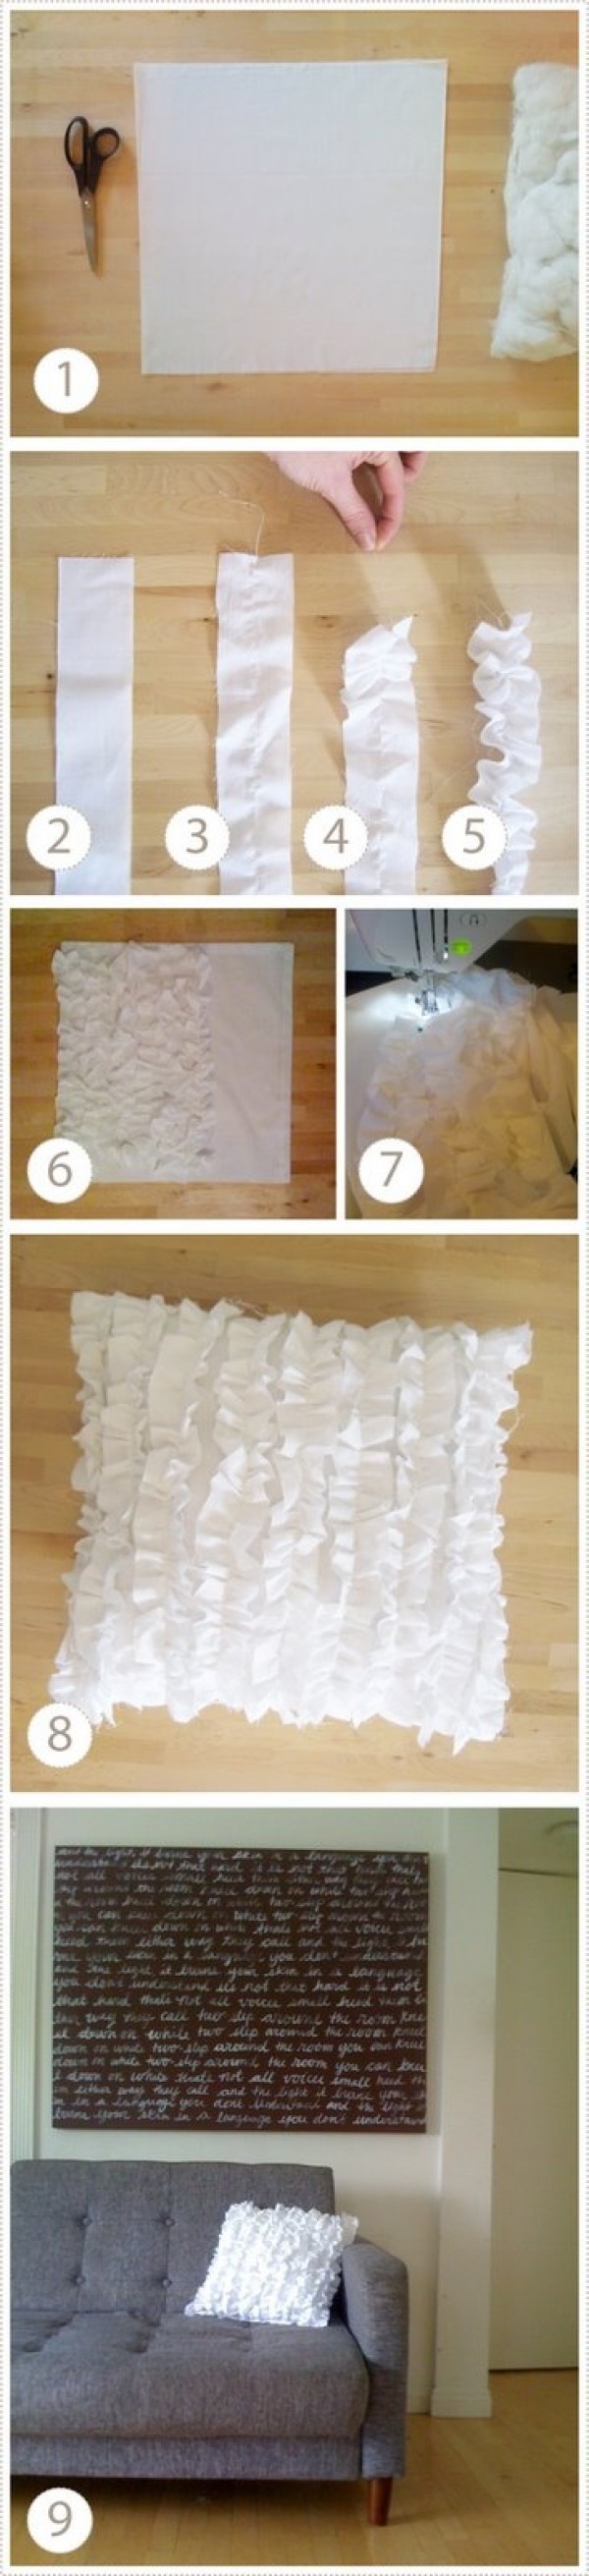 10 Insanely Easy DIY Pillow Cover Ideas - Love making this easy DIY ruffle pillow cover 